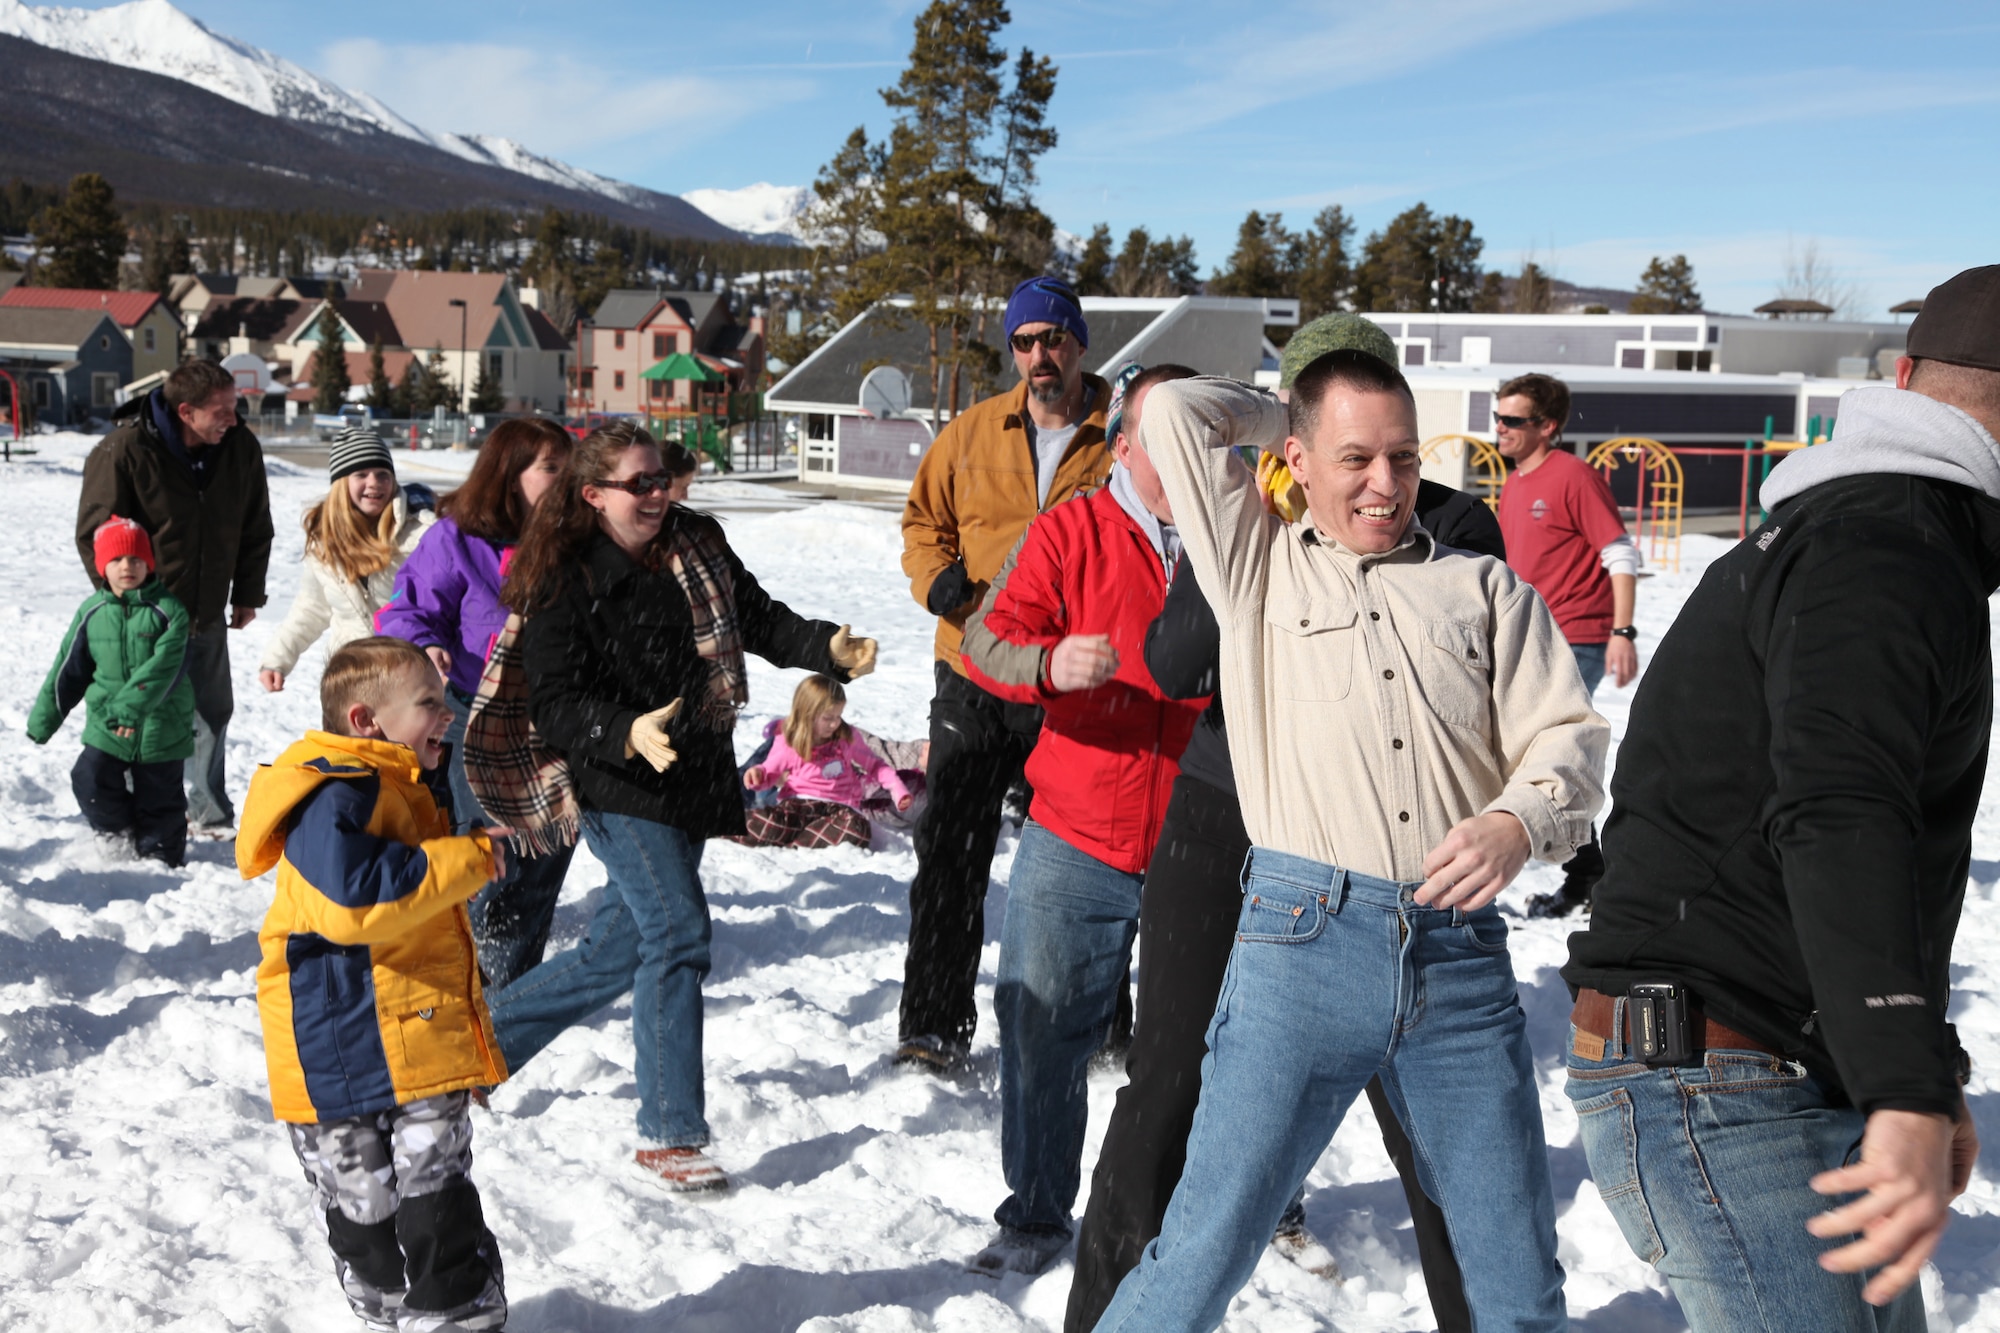 Maj. Jerry Becker, COARNG, passes a rubber chicken to a player behind hime during Family Games at the Colorado National Guard Yellow Ribbon Reintegration Retreat, Breckenridge, CO.  Members and their families, as well as members of the Colorado National Guard Family Support Group attend a family retreat in Breckenridge. Children were taught to snowshoe, families participated in outdoor games and exercises. (U.S. Air Force photo/Technical Sgt. Kevin Coulter) (RELEASED)